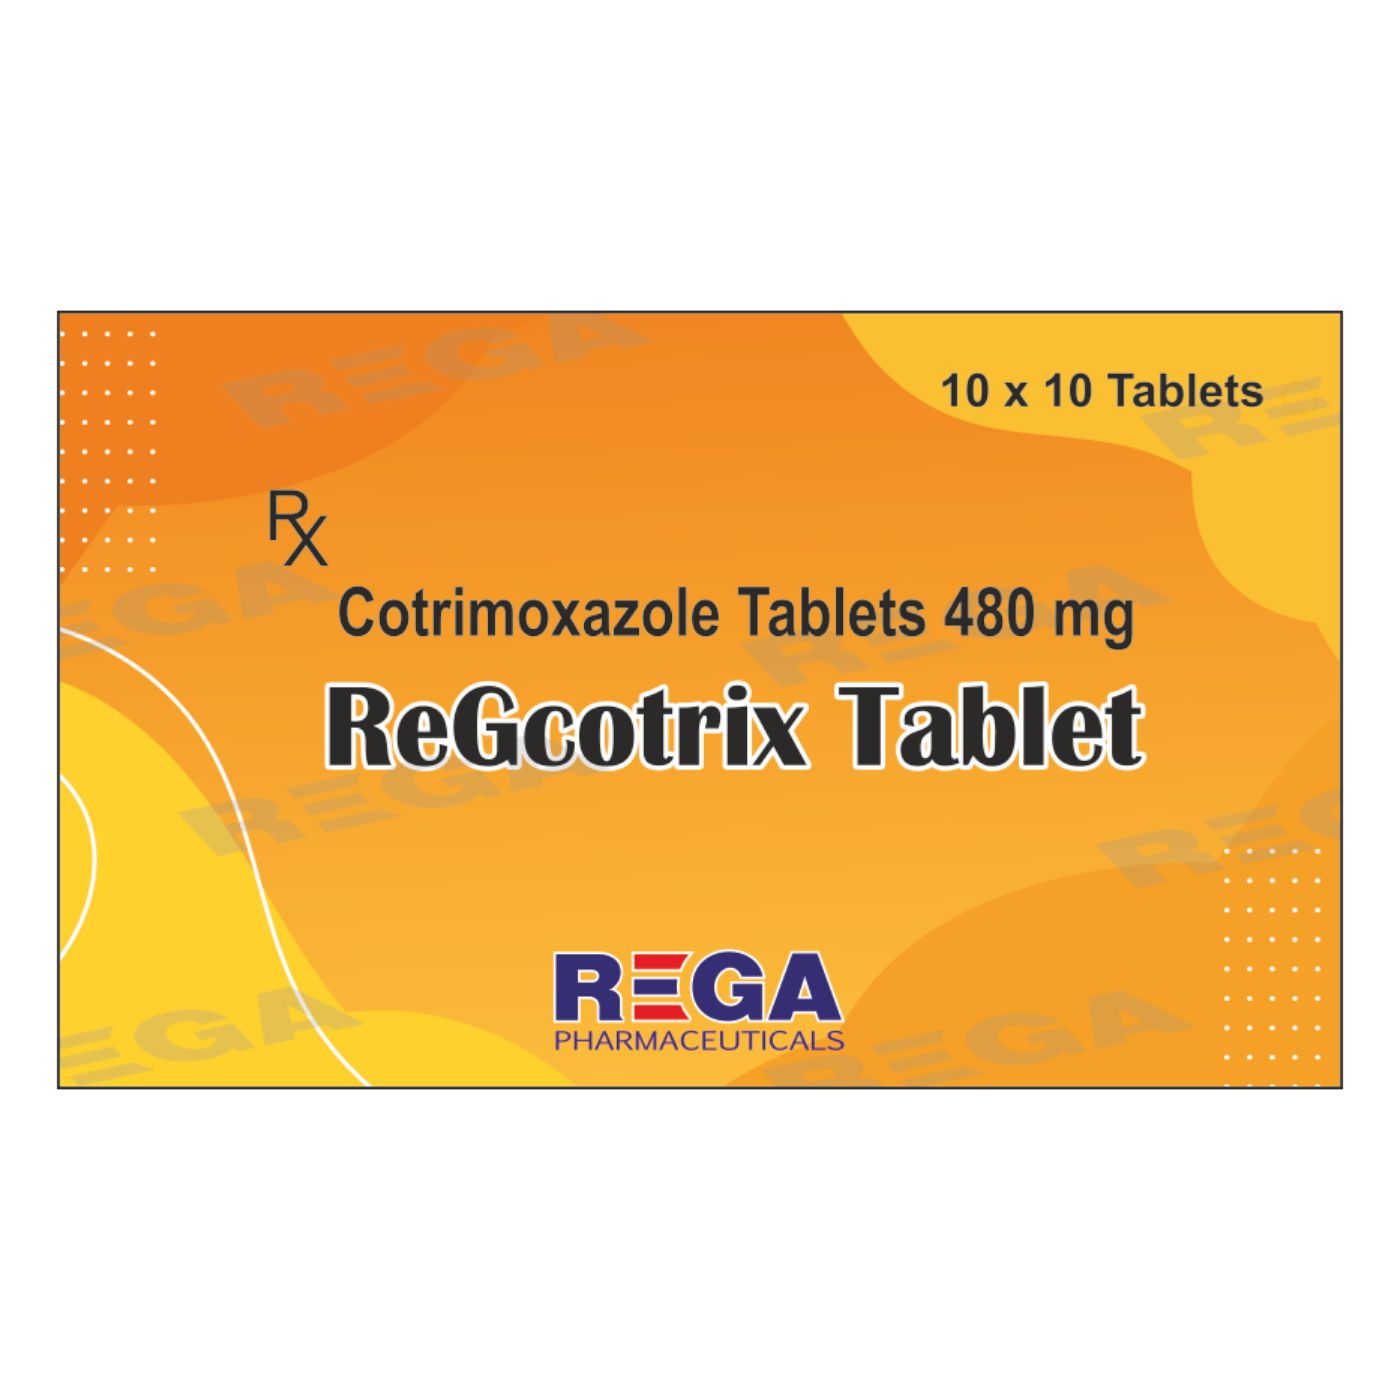 Cotrimoxazole Tablets 480 mg